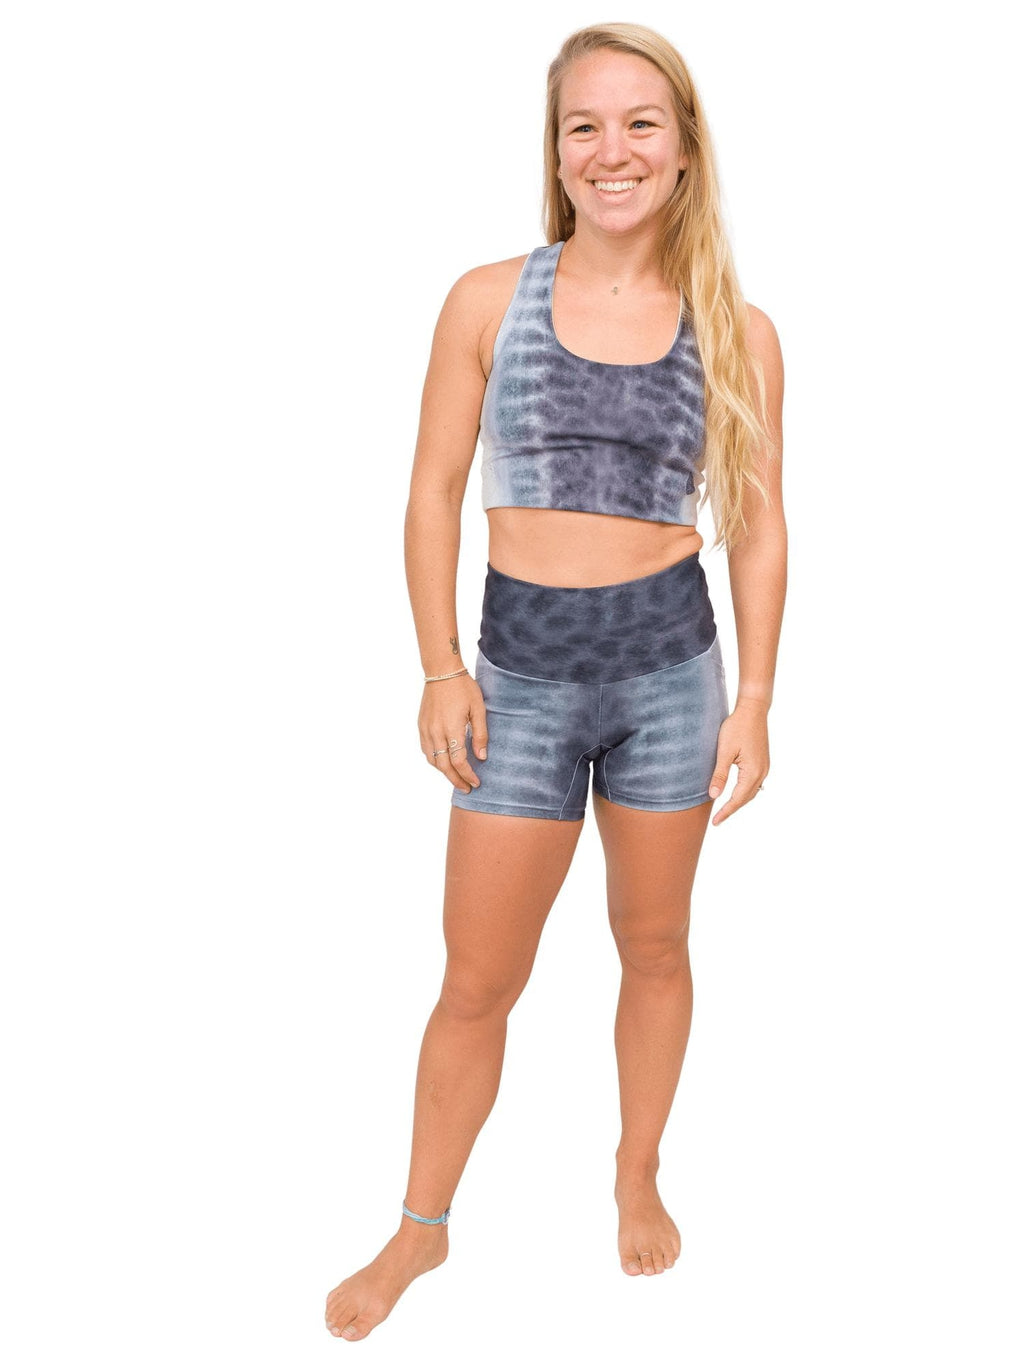 Model: Erin is a coral ecologist and Program Manager here at Waterlust. She 4&#39;11&quot;, 110 lbs, 32A and is wearing an XS short and XS top.